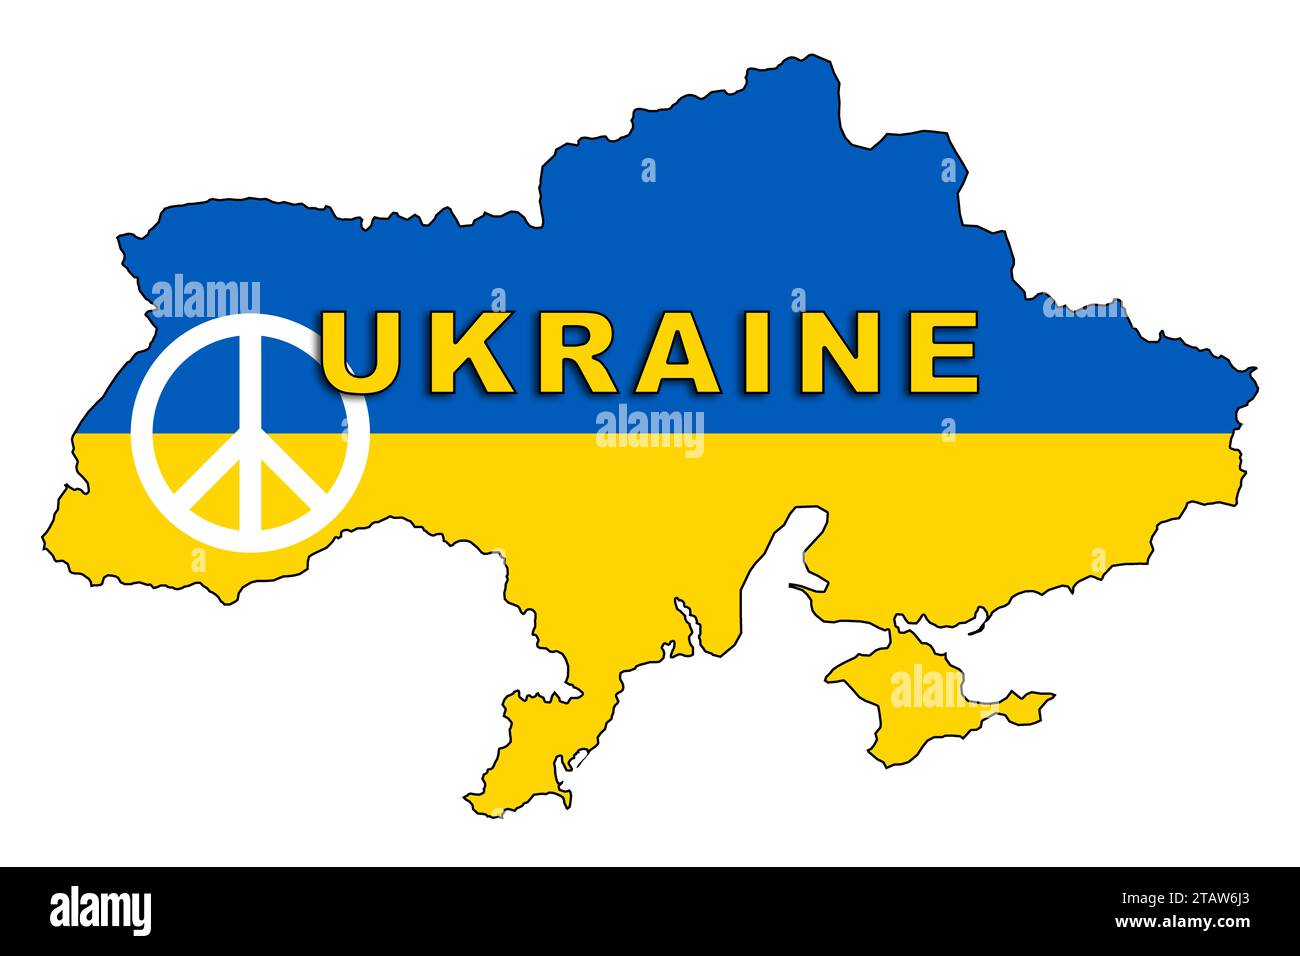 Ukraine with the shape, colors and name of the nation, illustrated graphics for the logo with the peace symbol. Stock Photo